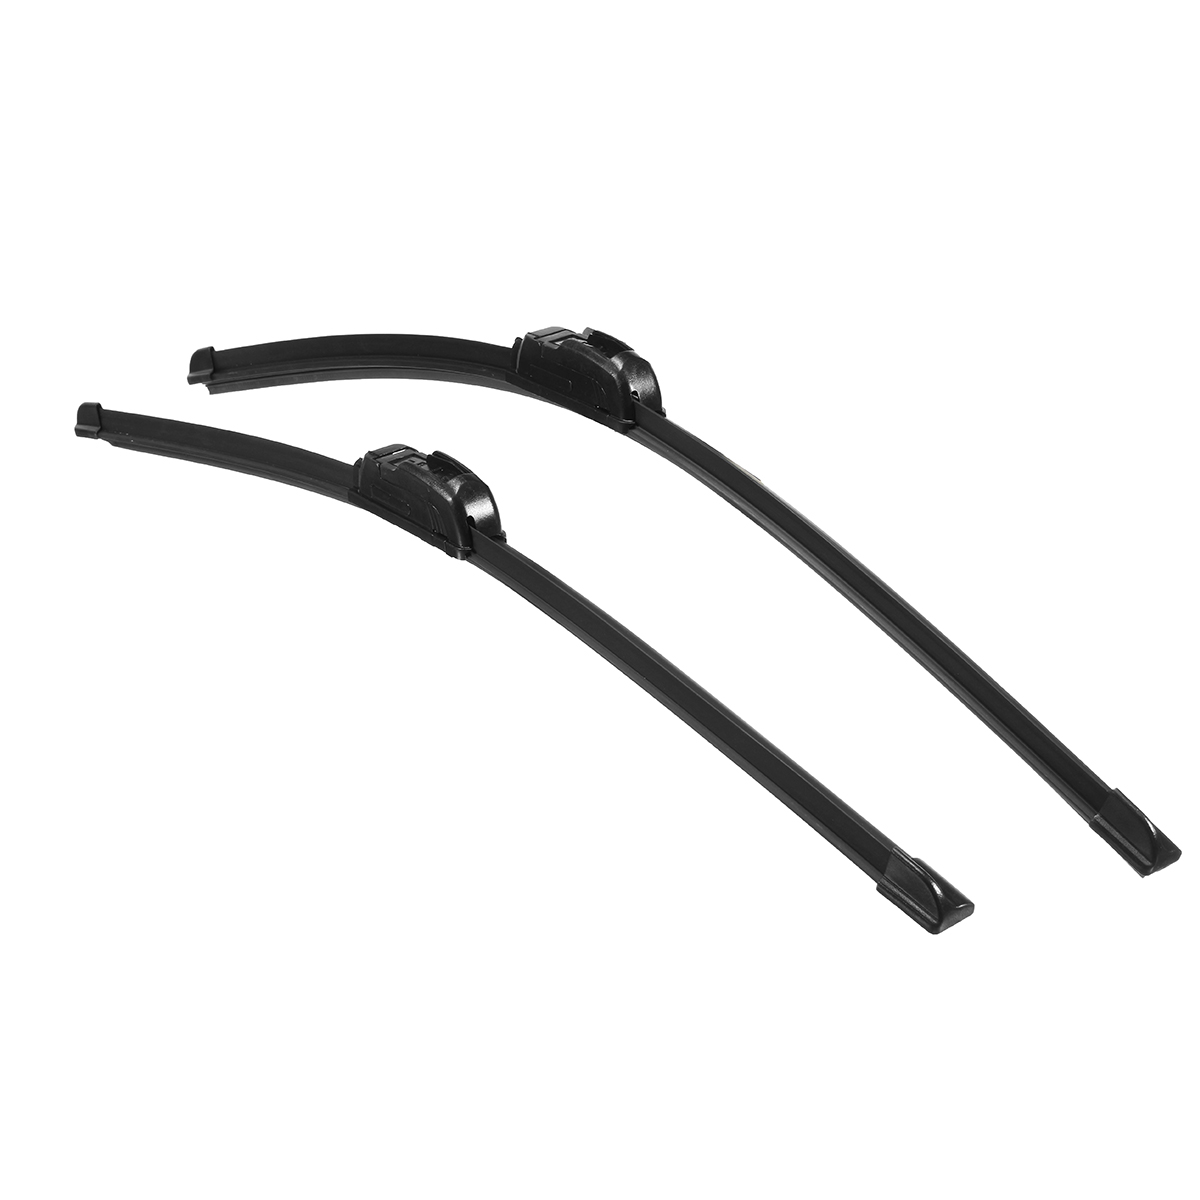 Pair Windshield Wiper Driver 22 Inch Passanger Side 20 Inch for Ford Falcon FG20 08-12